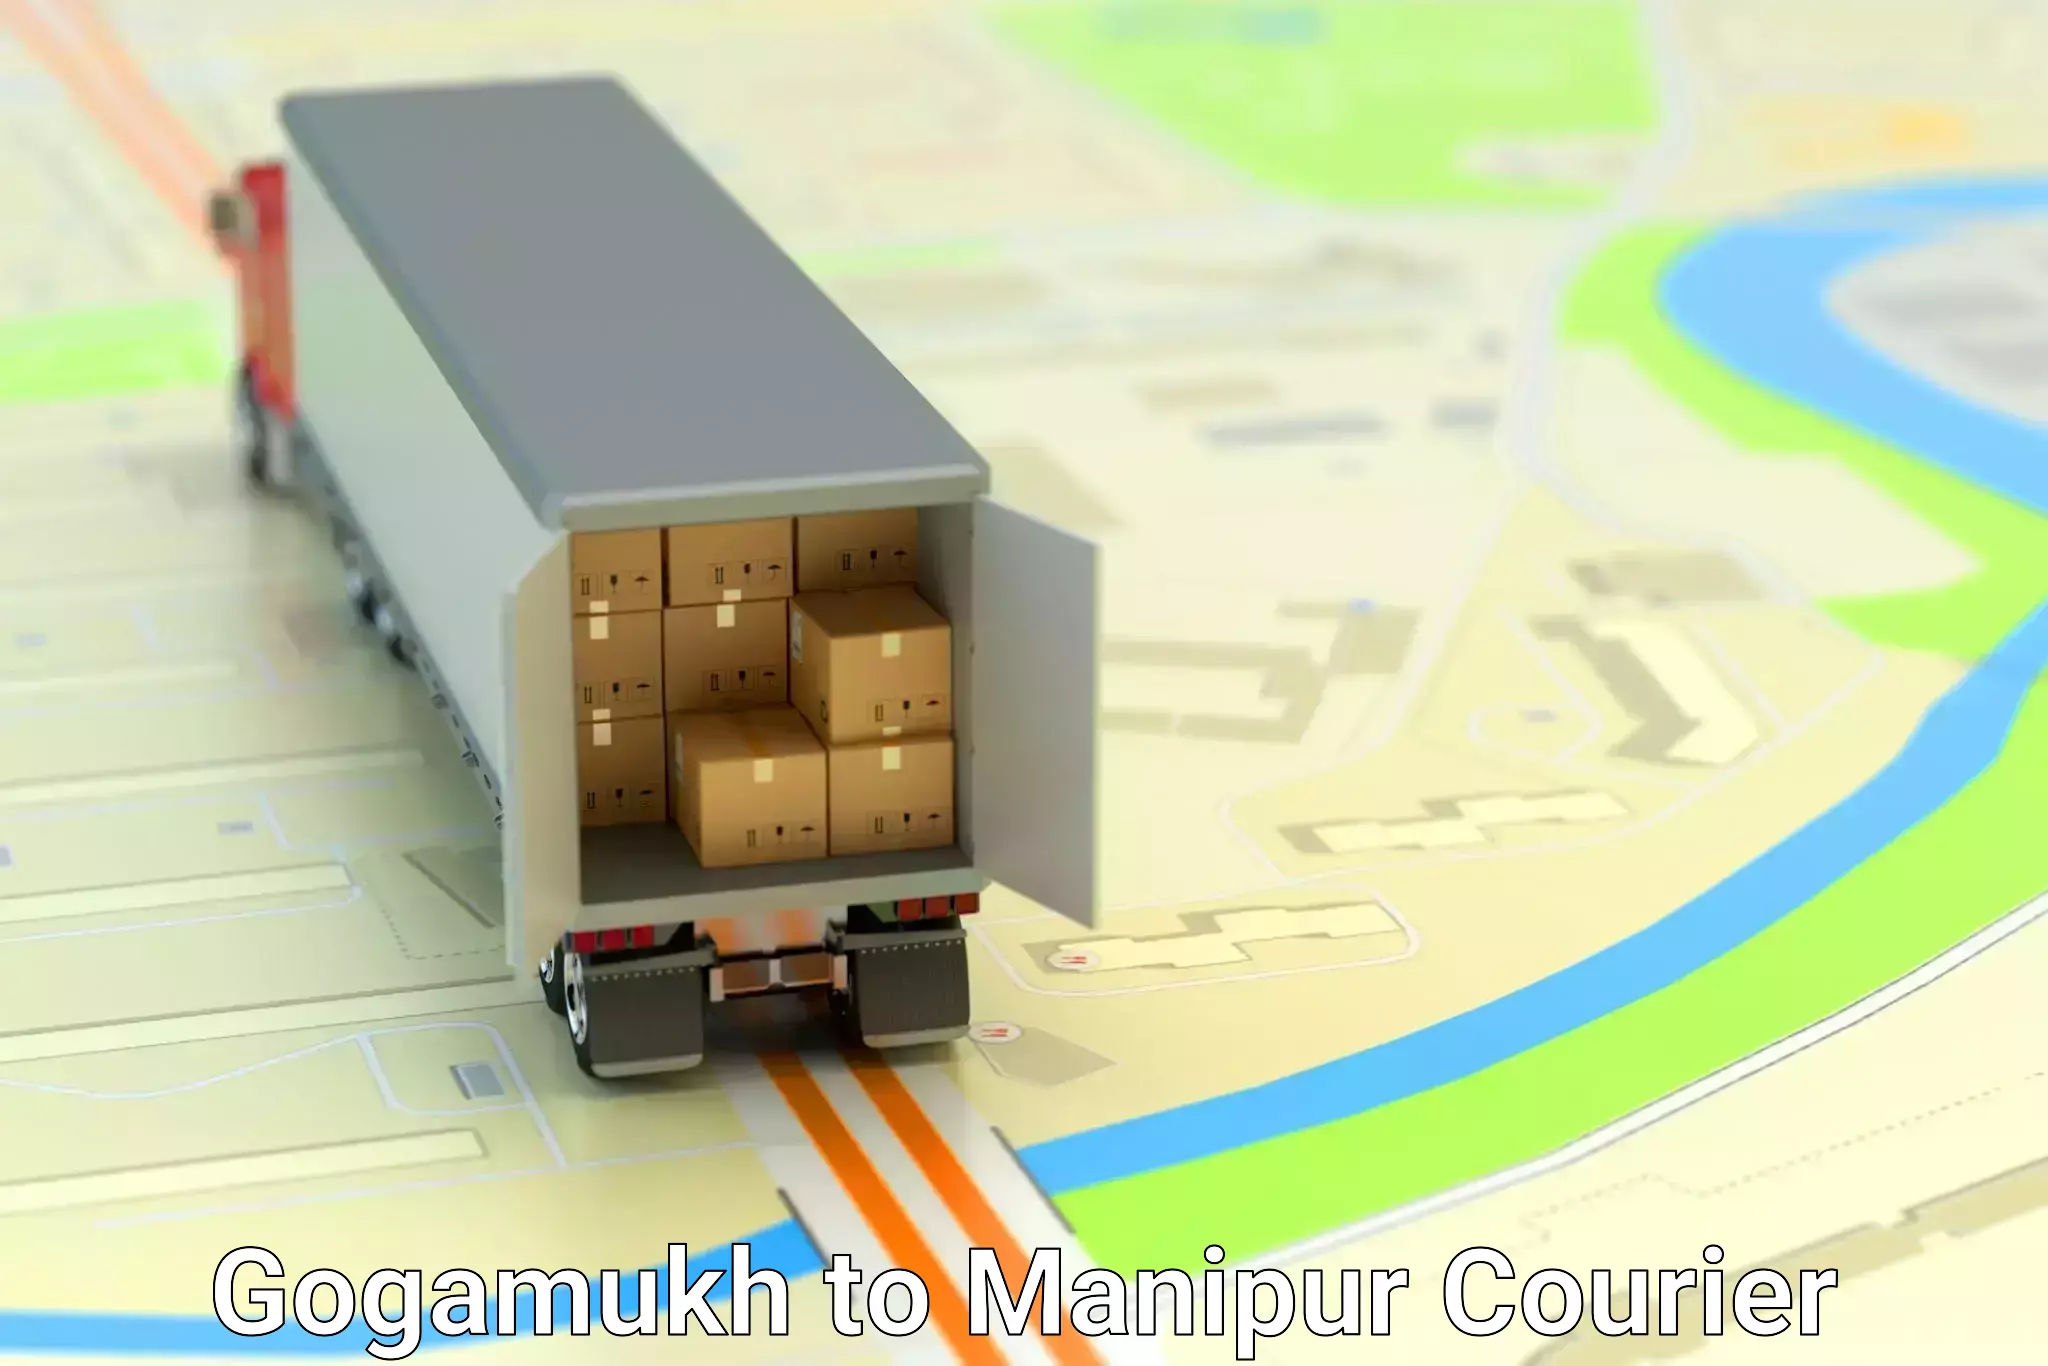 Parcel handling and care Gogamukh to Manipur